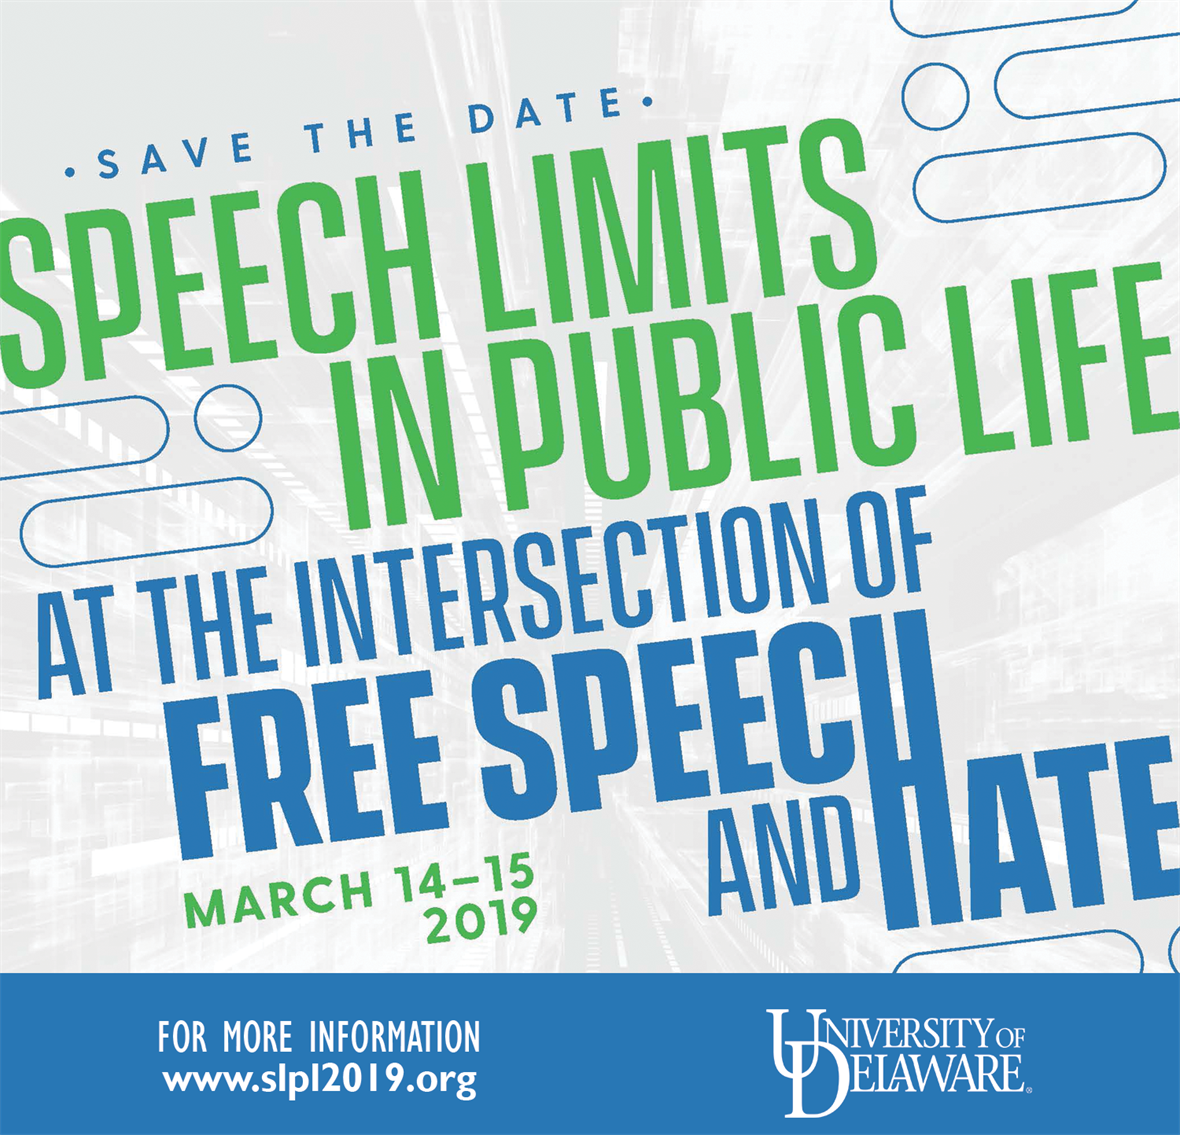 Save the Date: Speech Limits in Public Life Conference, March 14-15, 2019, www.slpl2019.org, University of Delaware